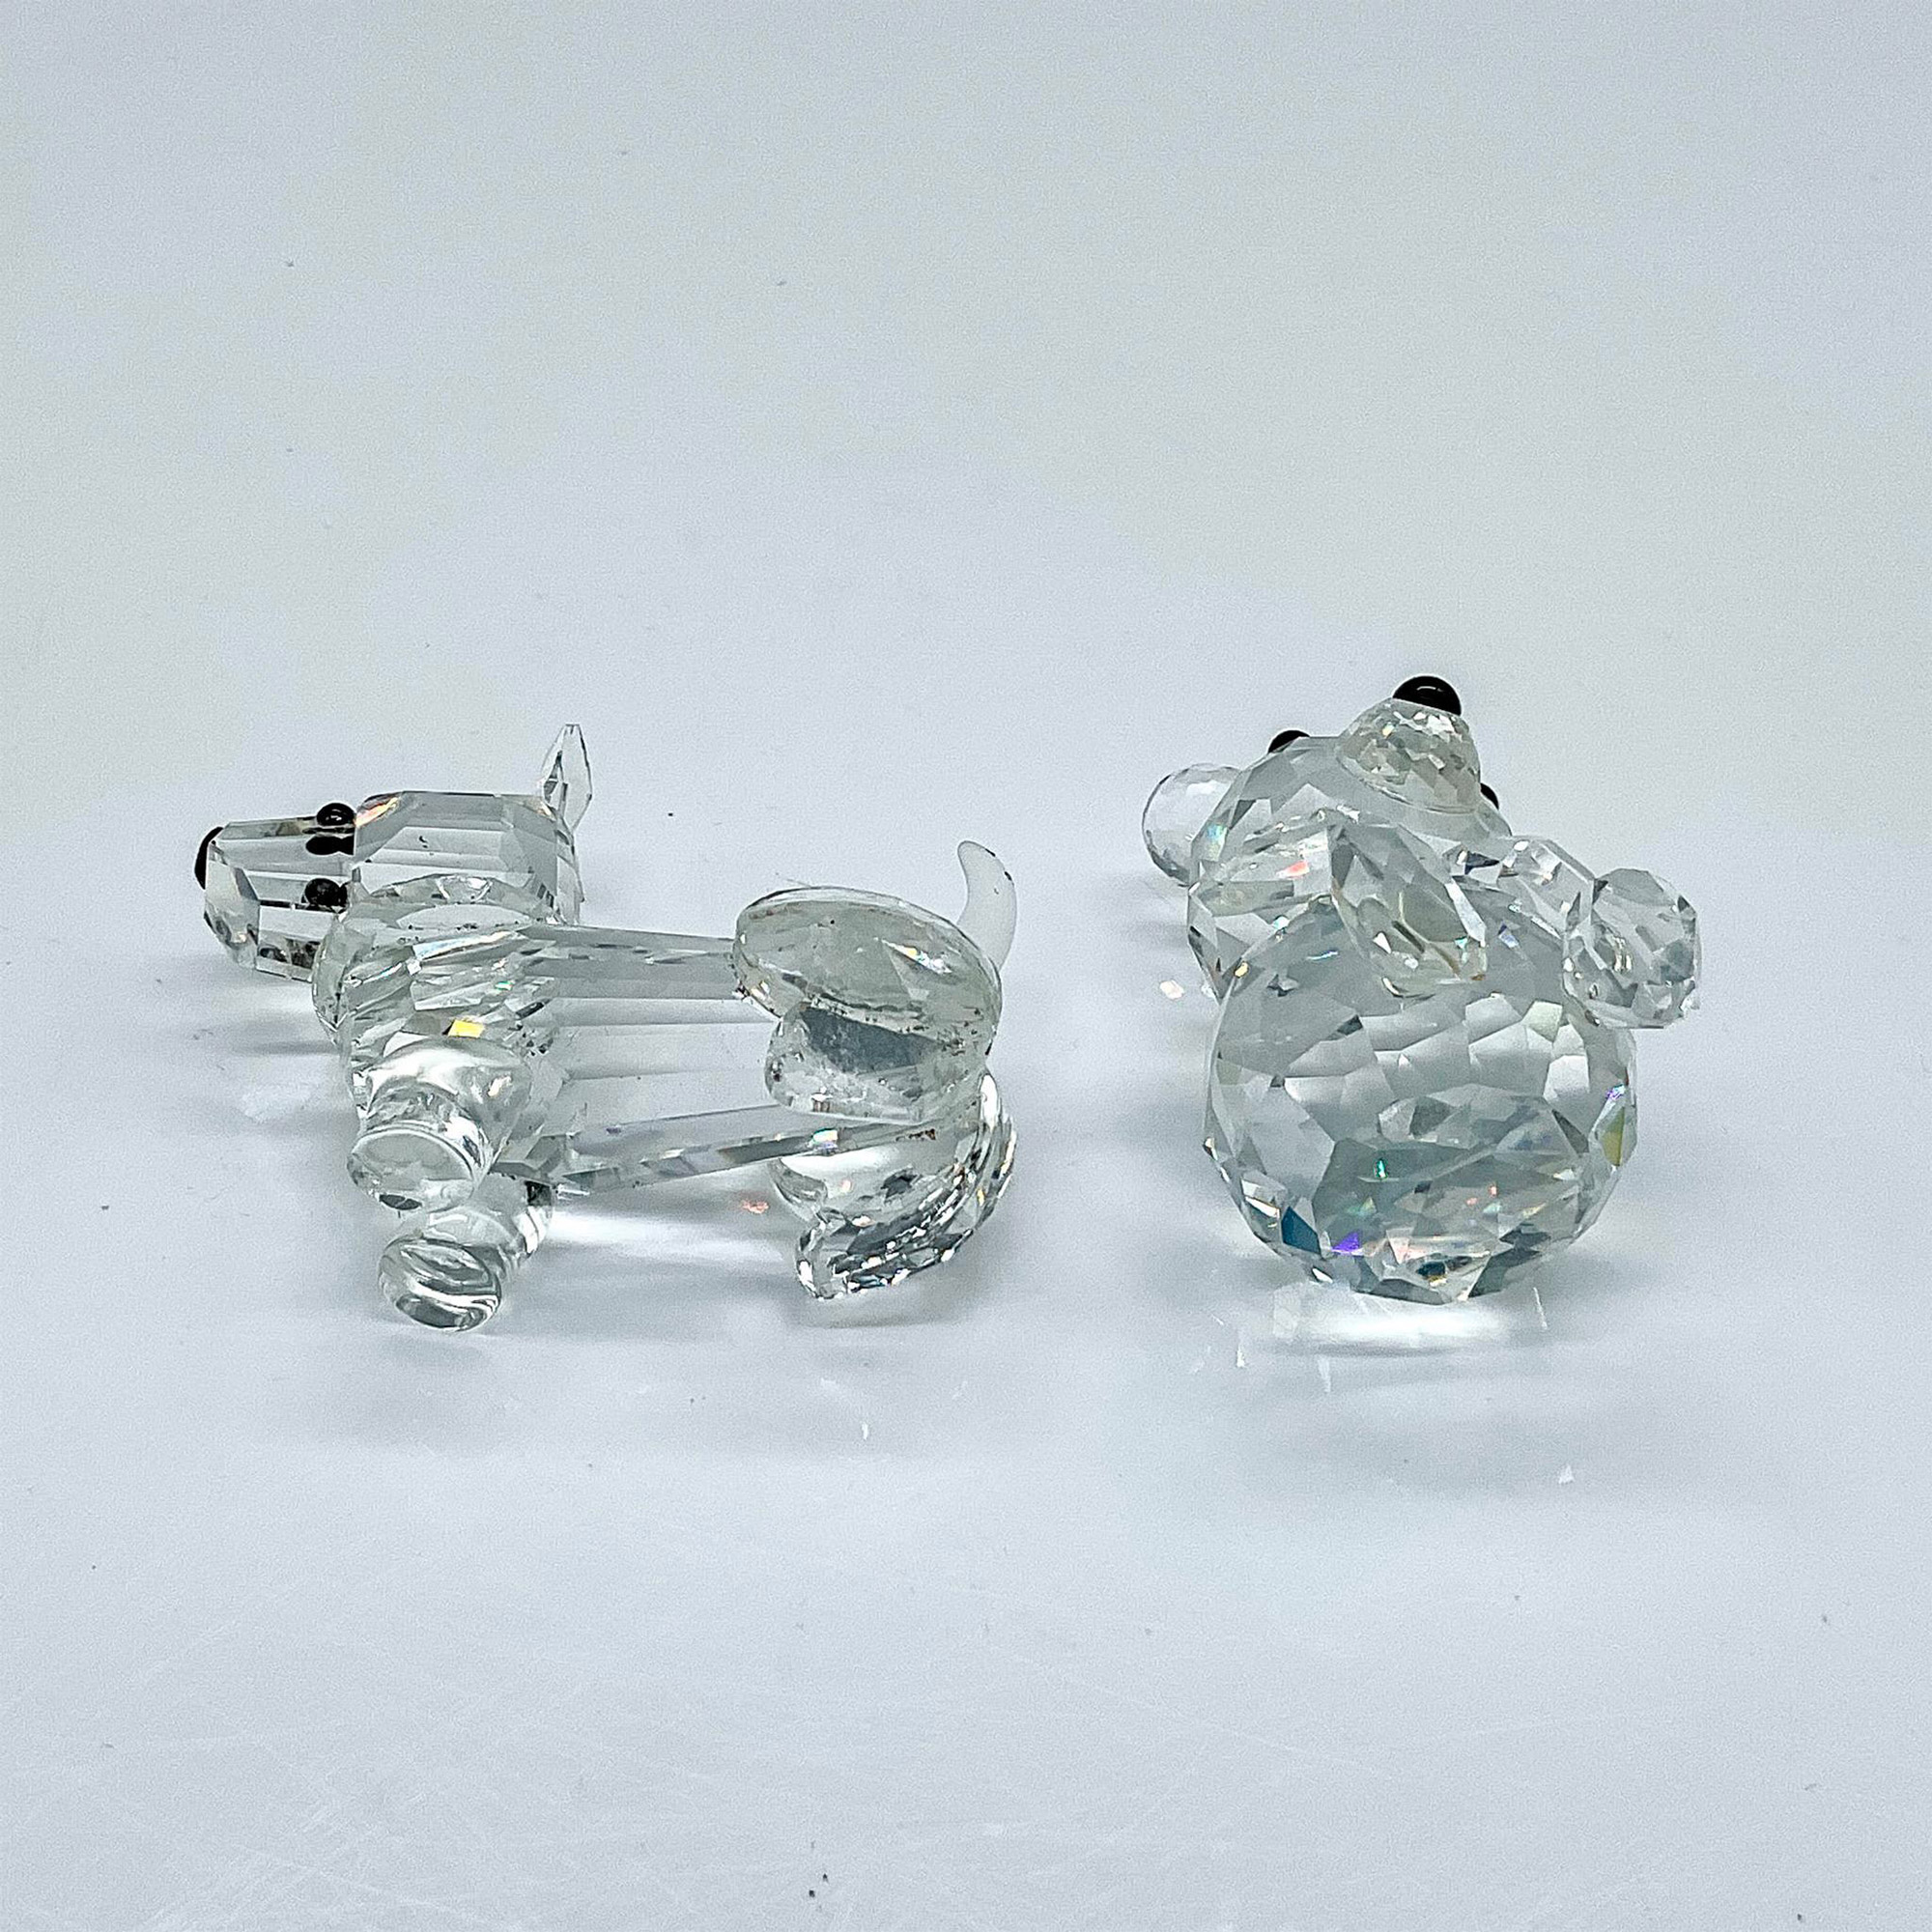 2pc Swarovski Silver Crystal Figurines, Bear and Terrier - Image 3 of 4